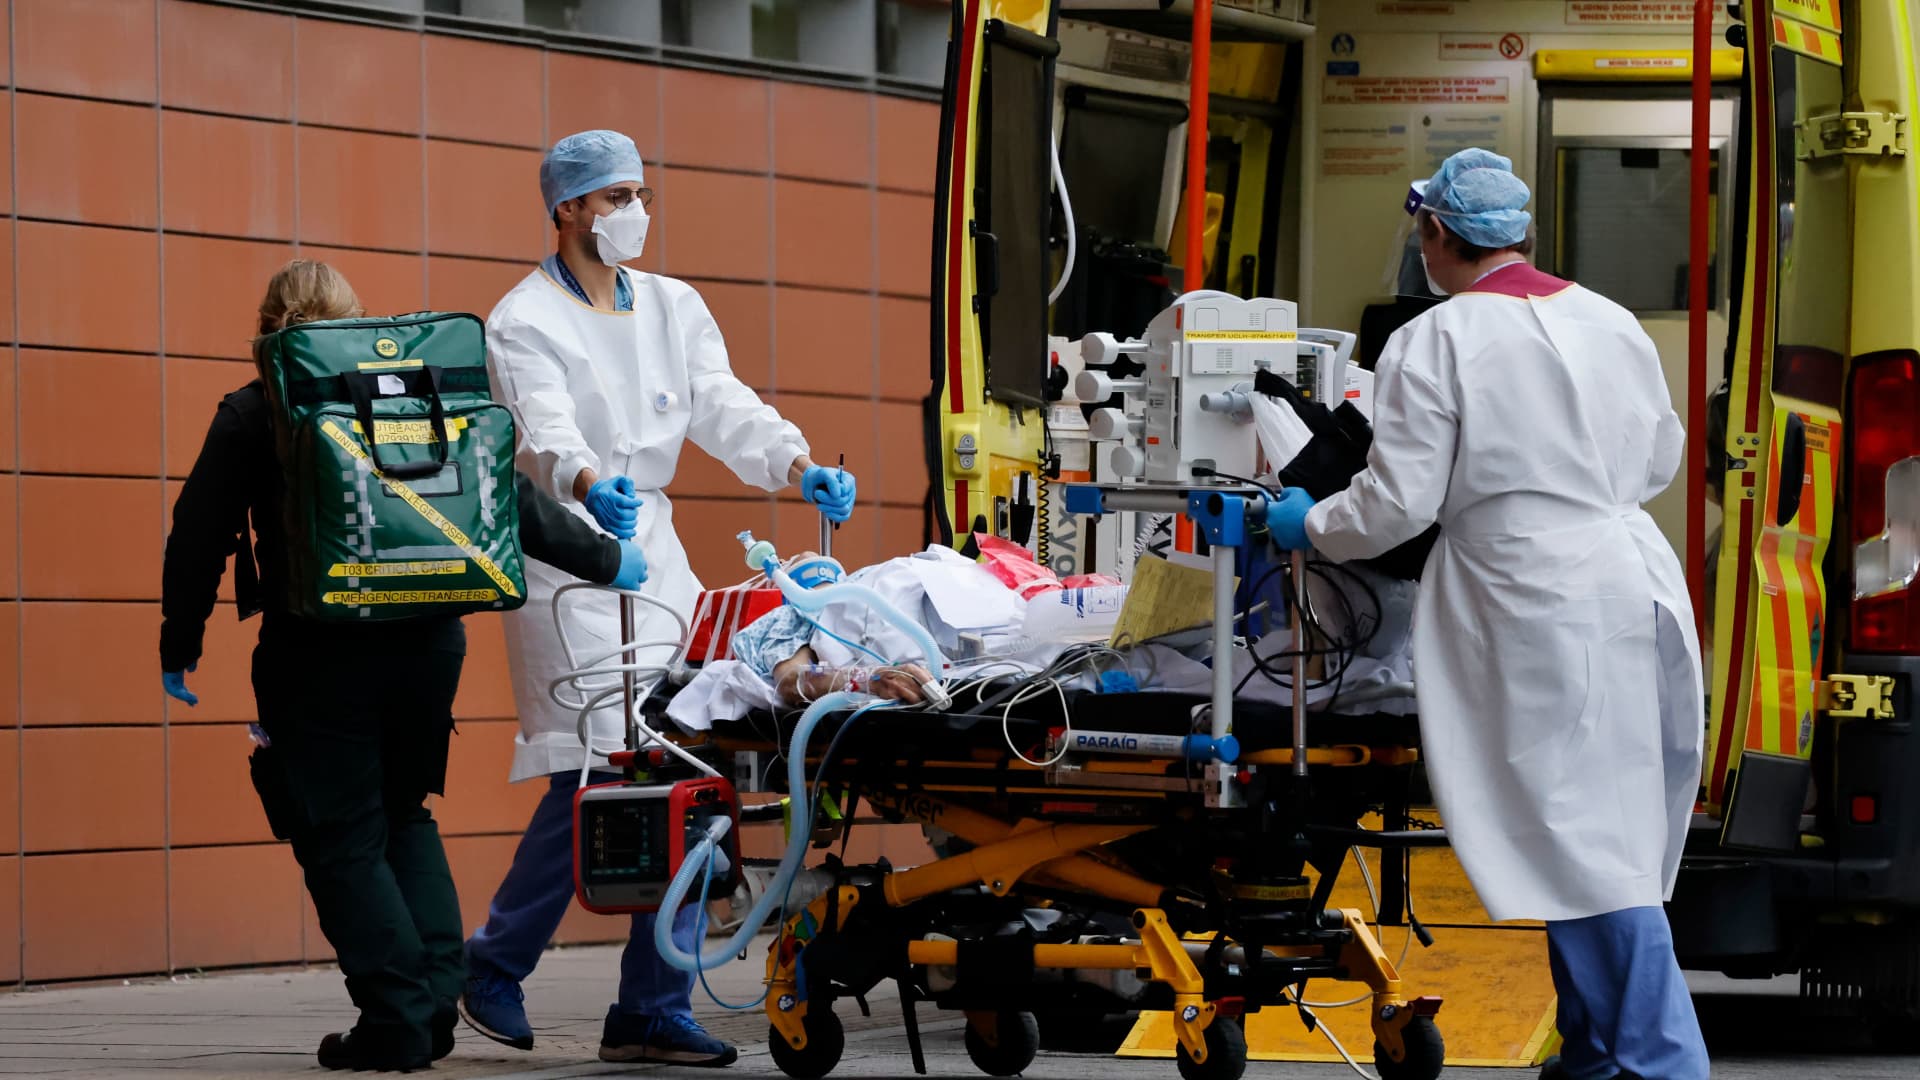 Medics take a patient from an ambulance into the Royal London hospital in London on January 19, 2021.